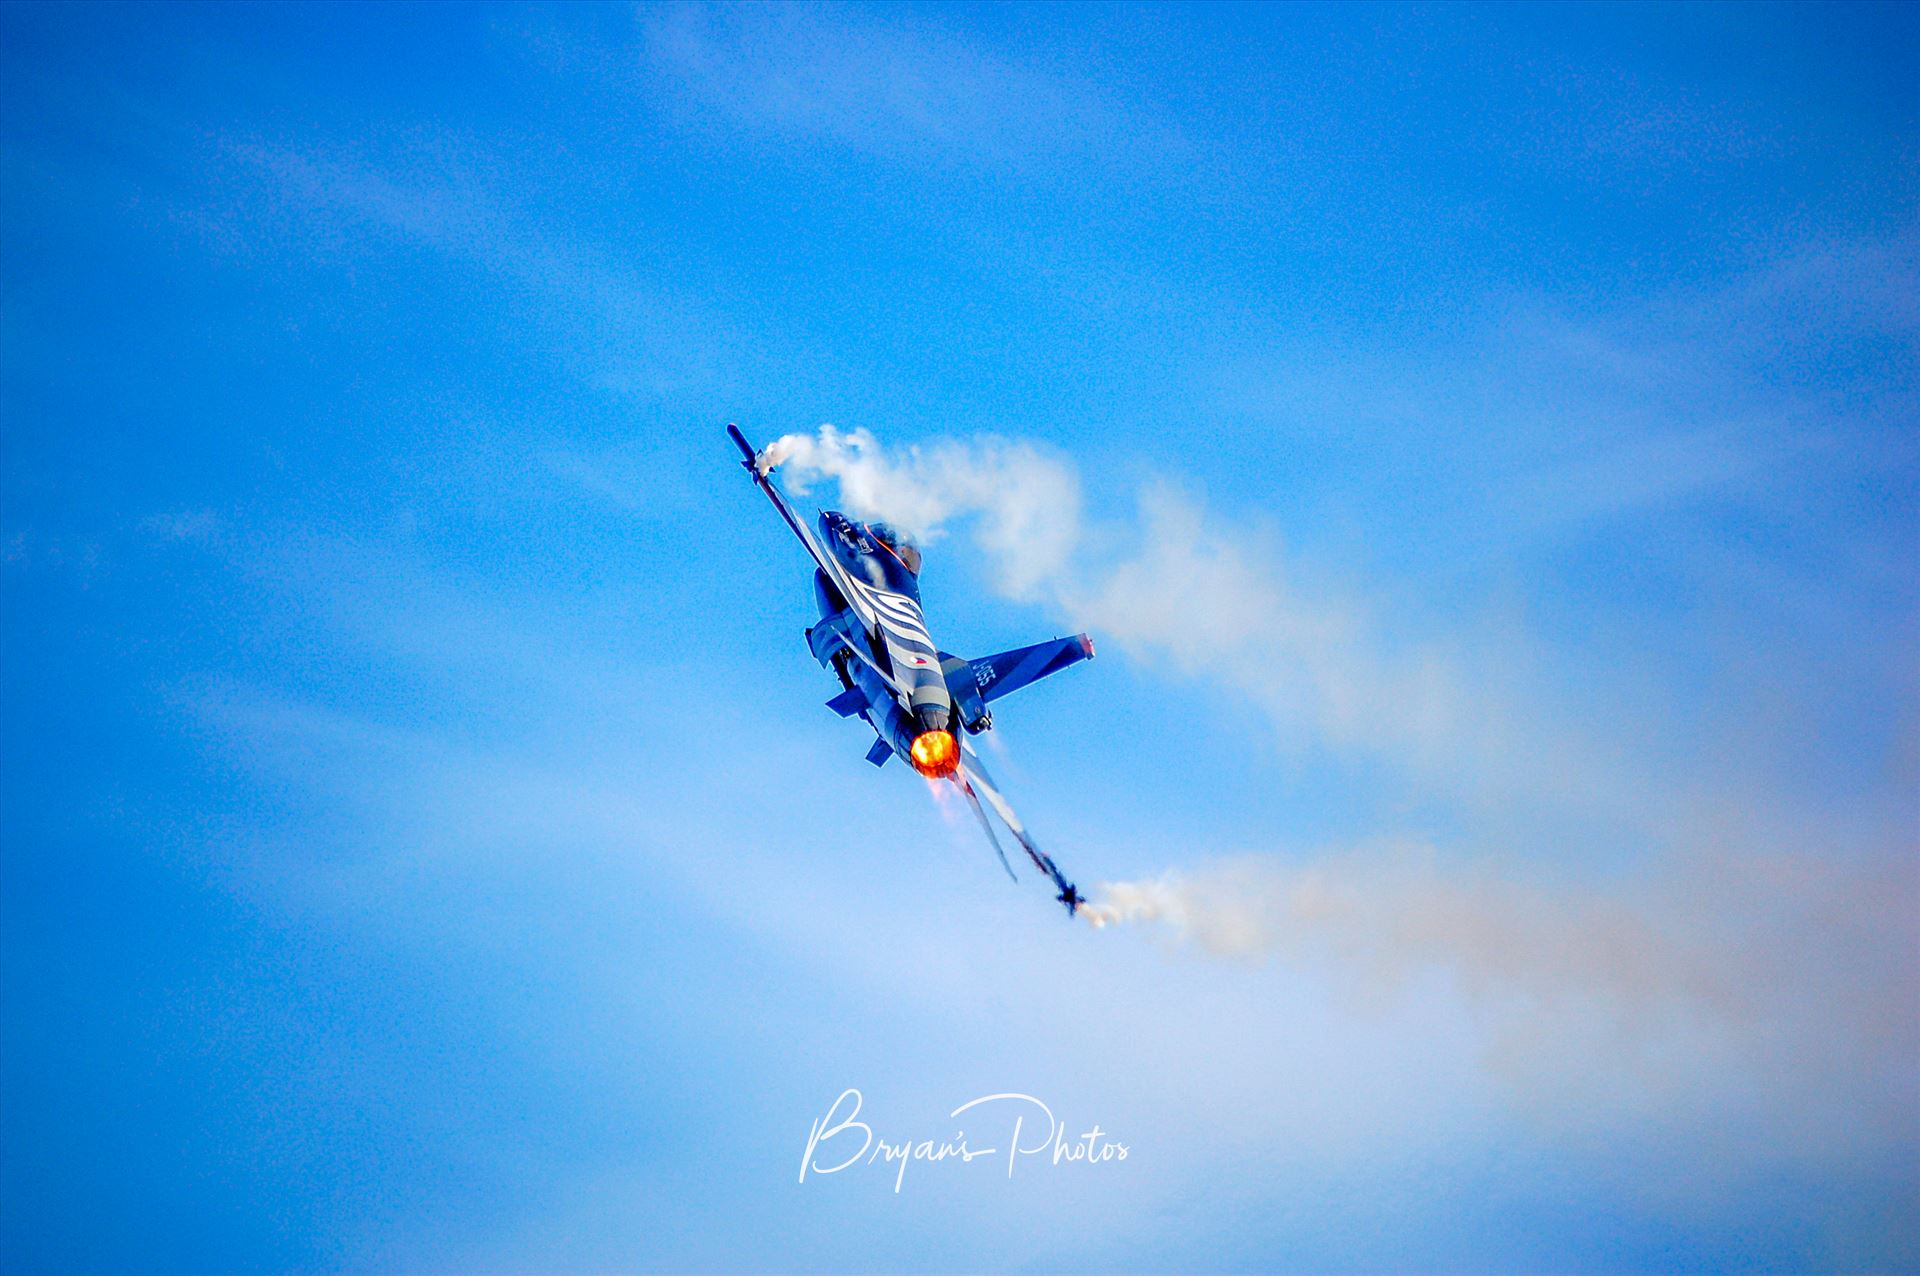 F16 Afterburner Photo of a dutch F16 displaying at air show by Bryans Photos